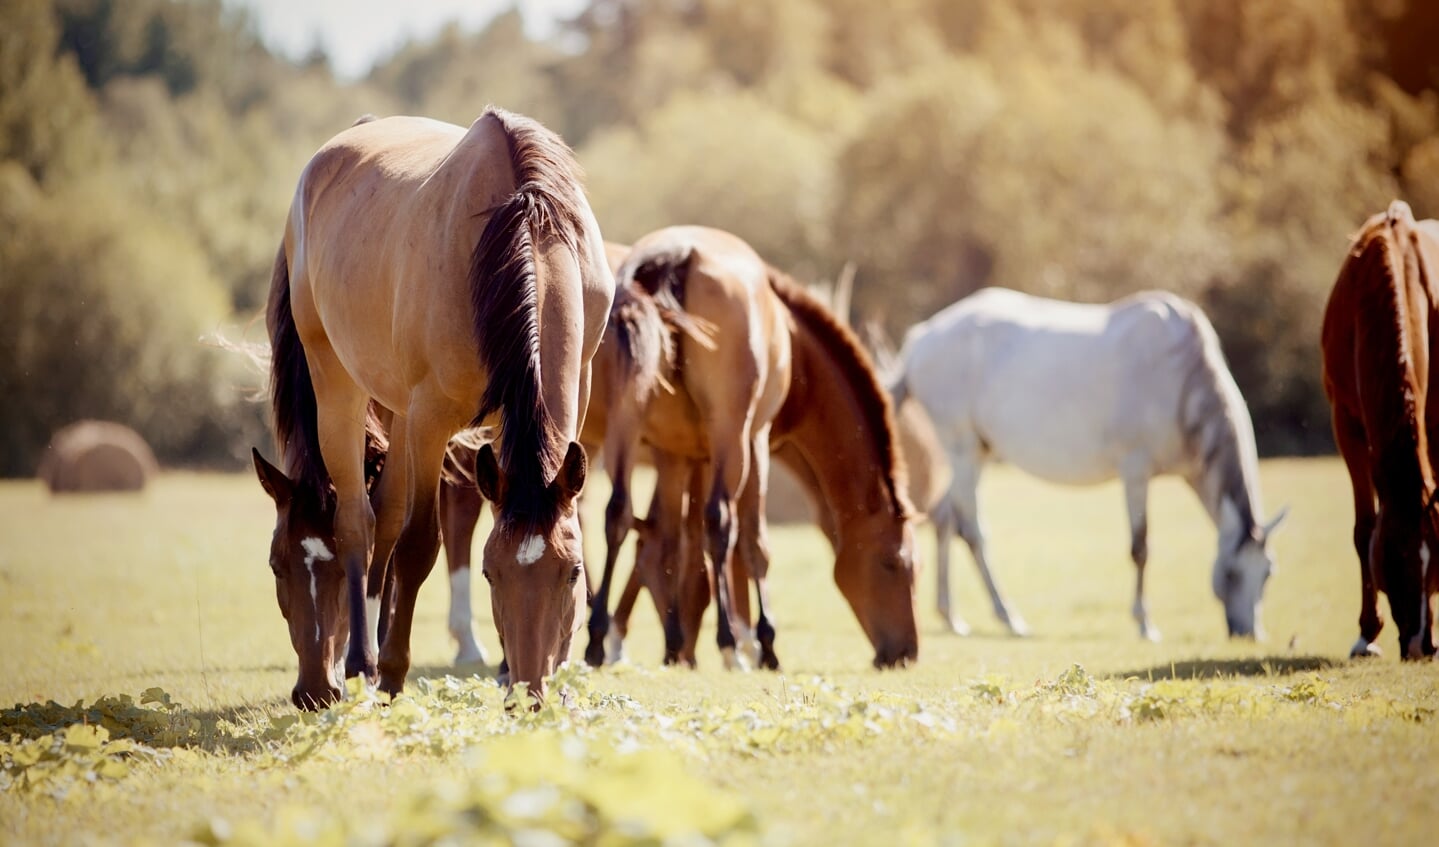 A herd of sporting horses grazing on the field.